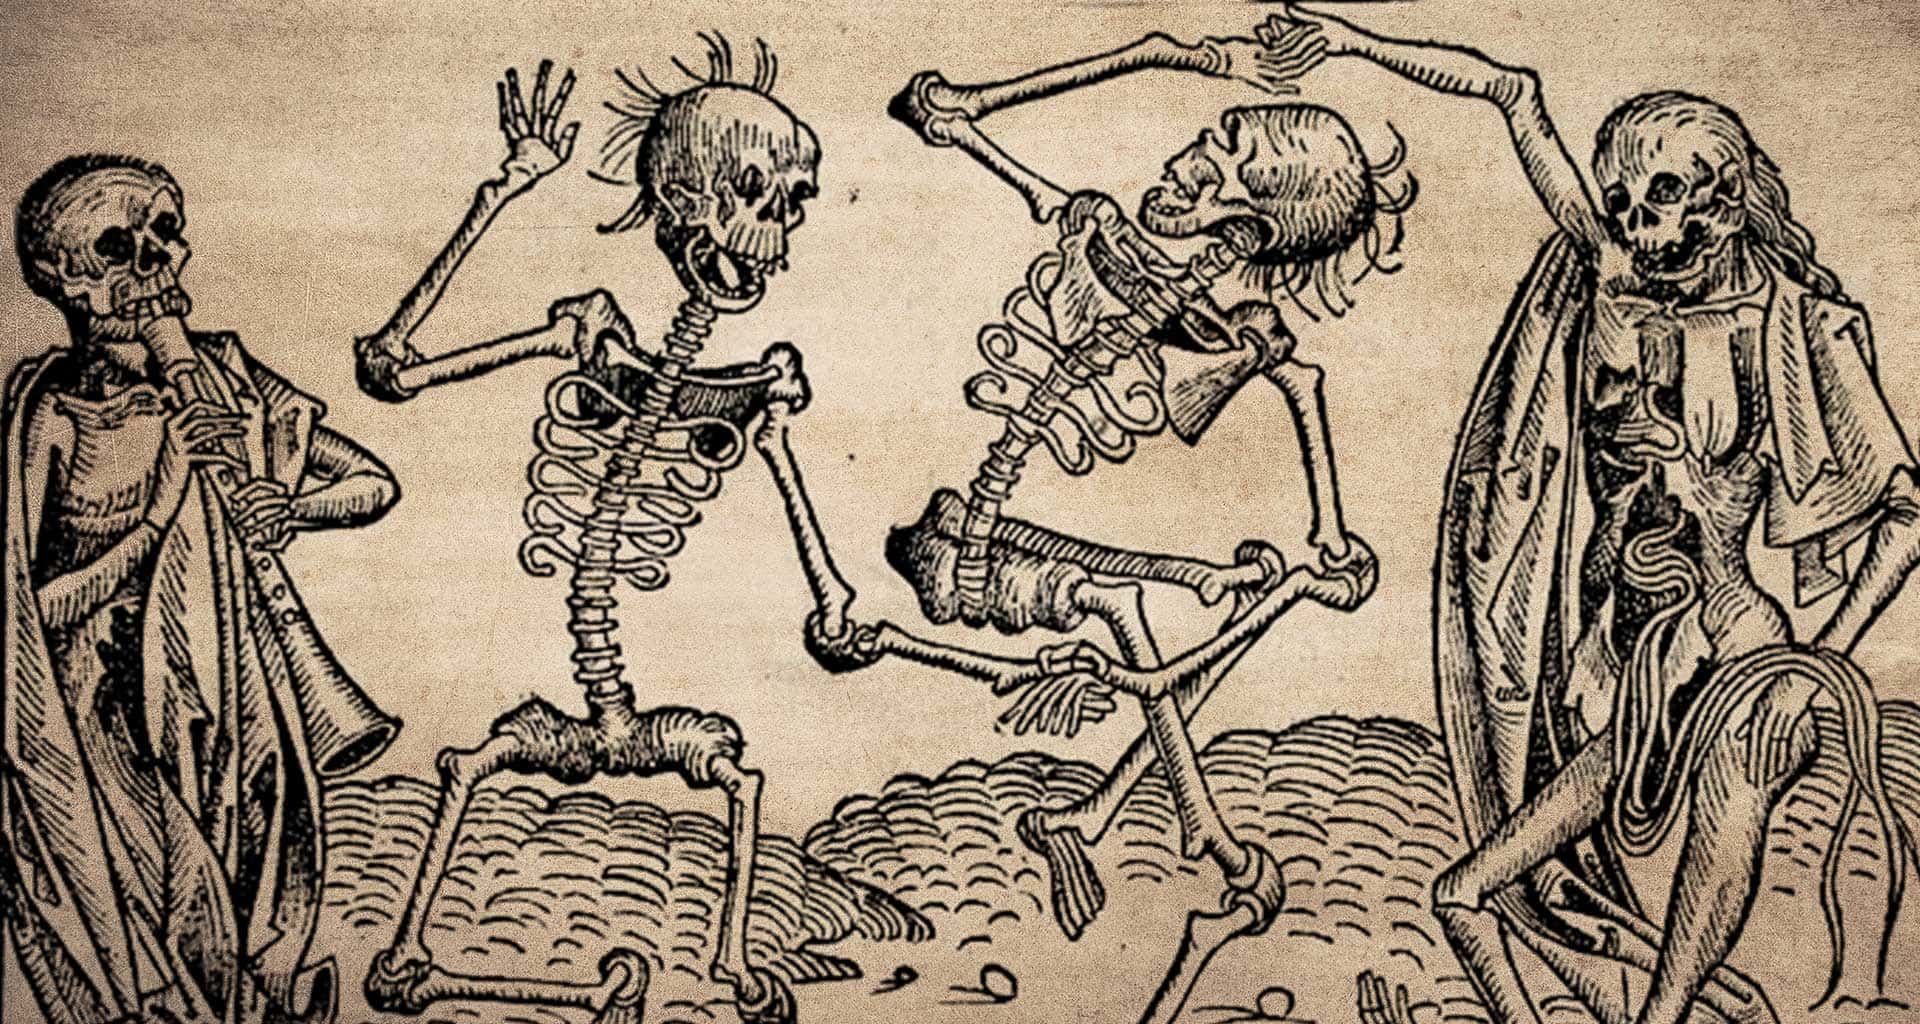 The Black Death facts